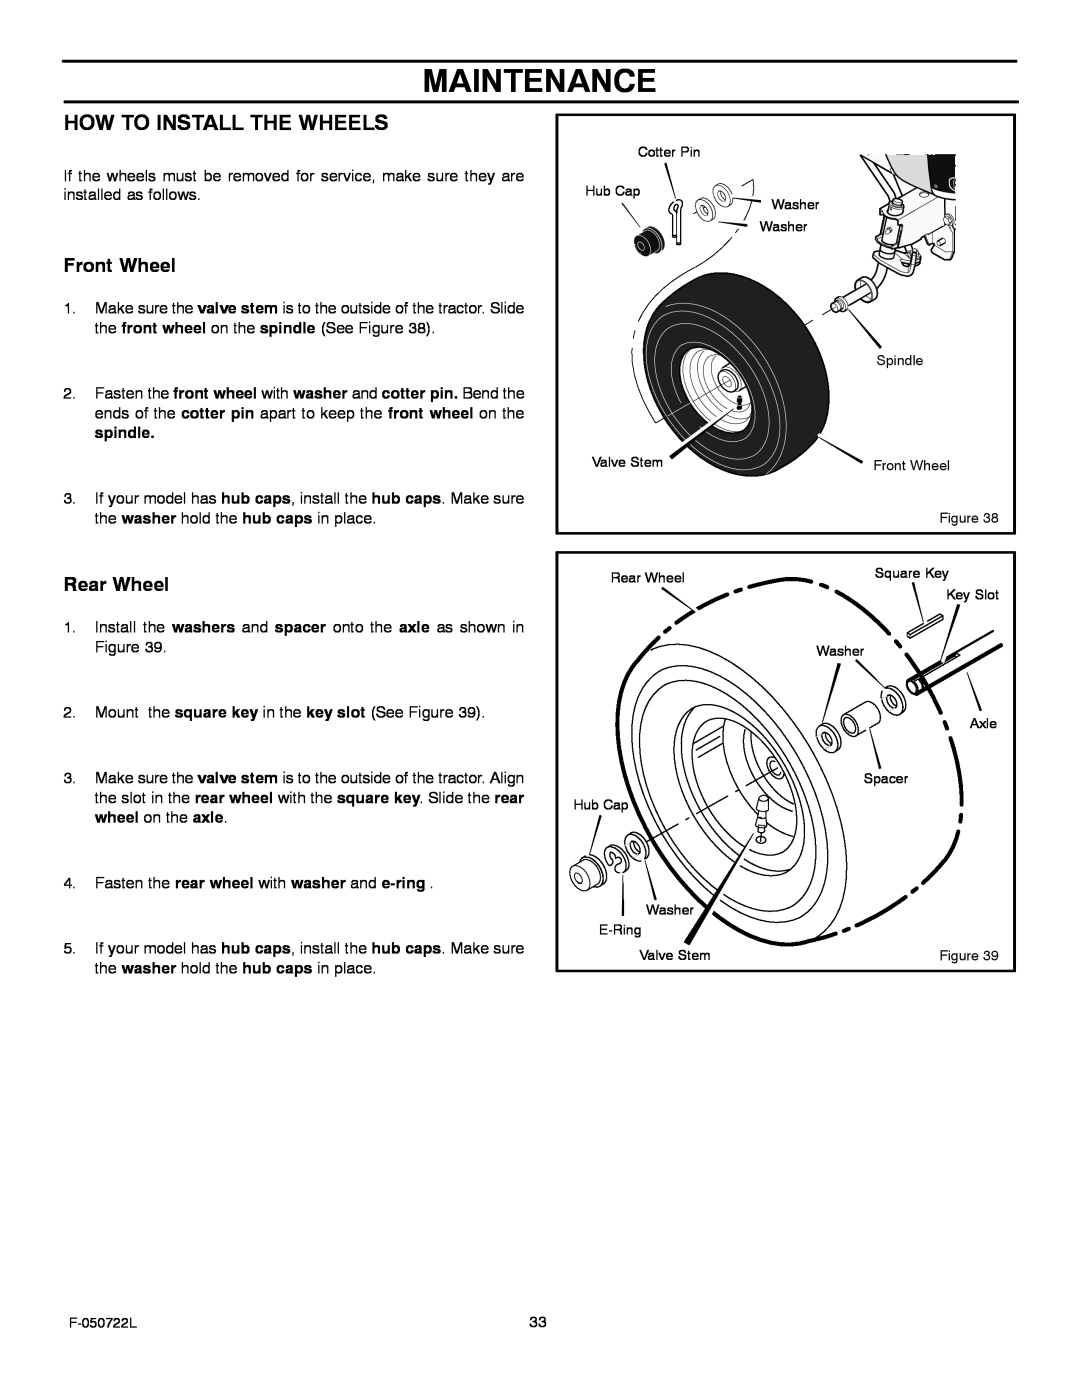 Murray 425001x99A manual Maintenance, How To Install The Wheels, Front Wheel, Rear Wheel 